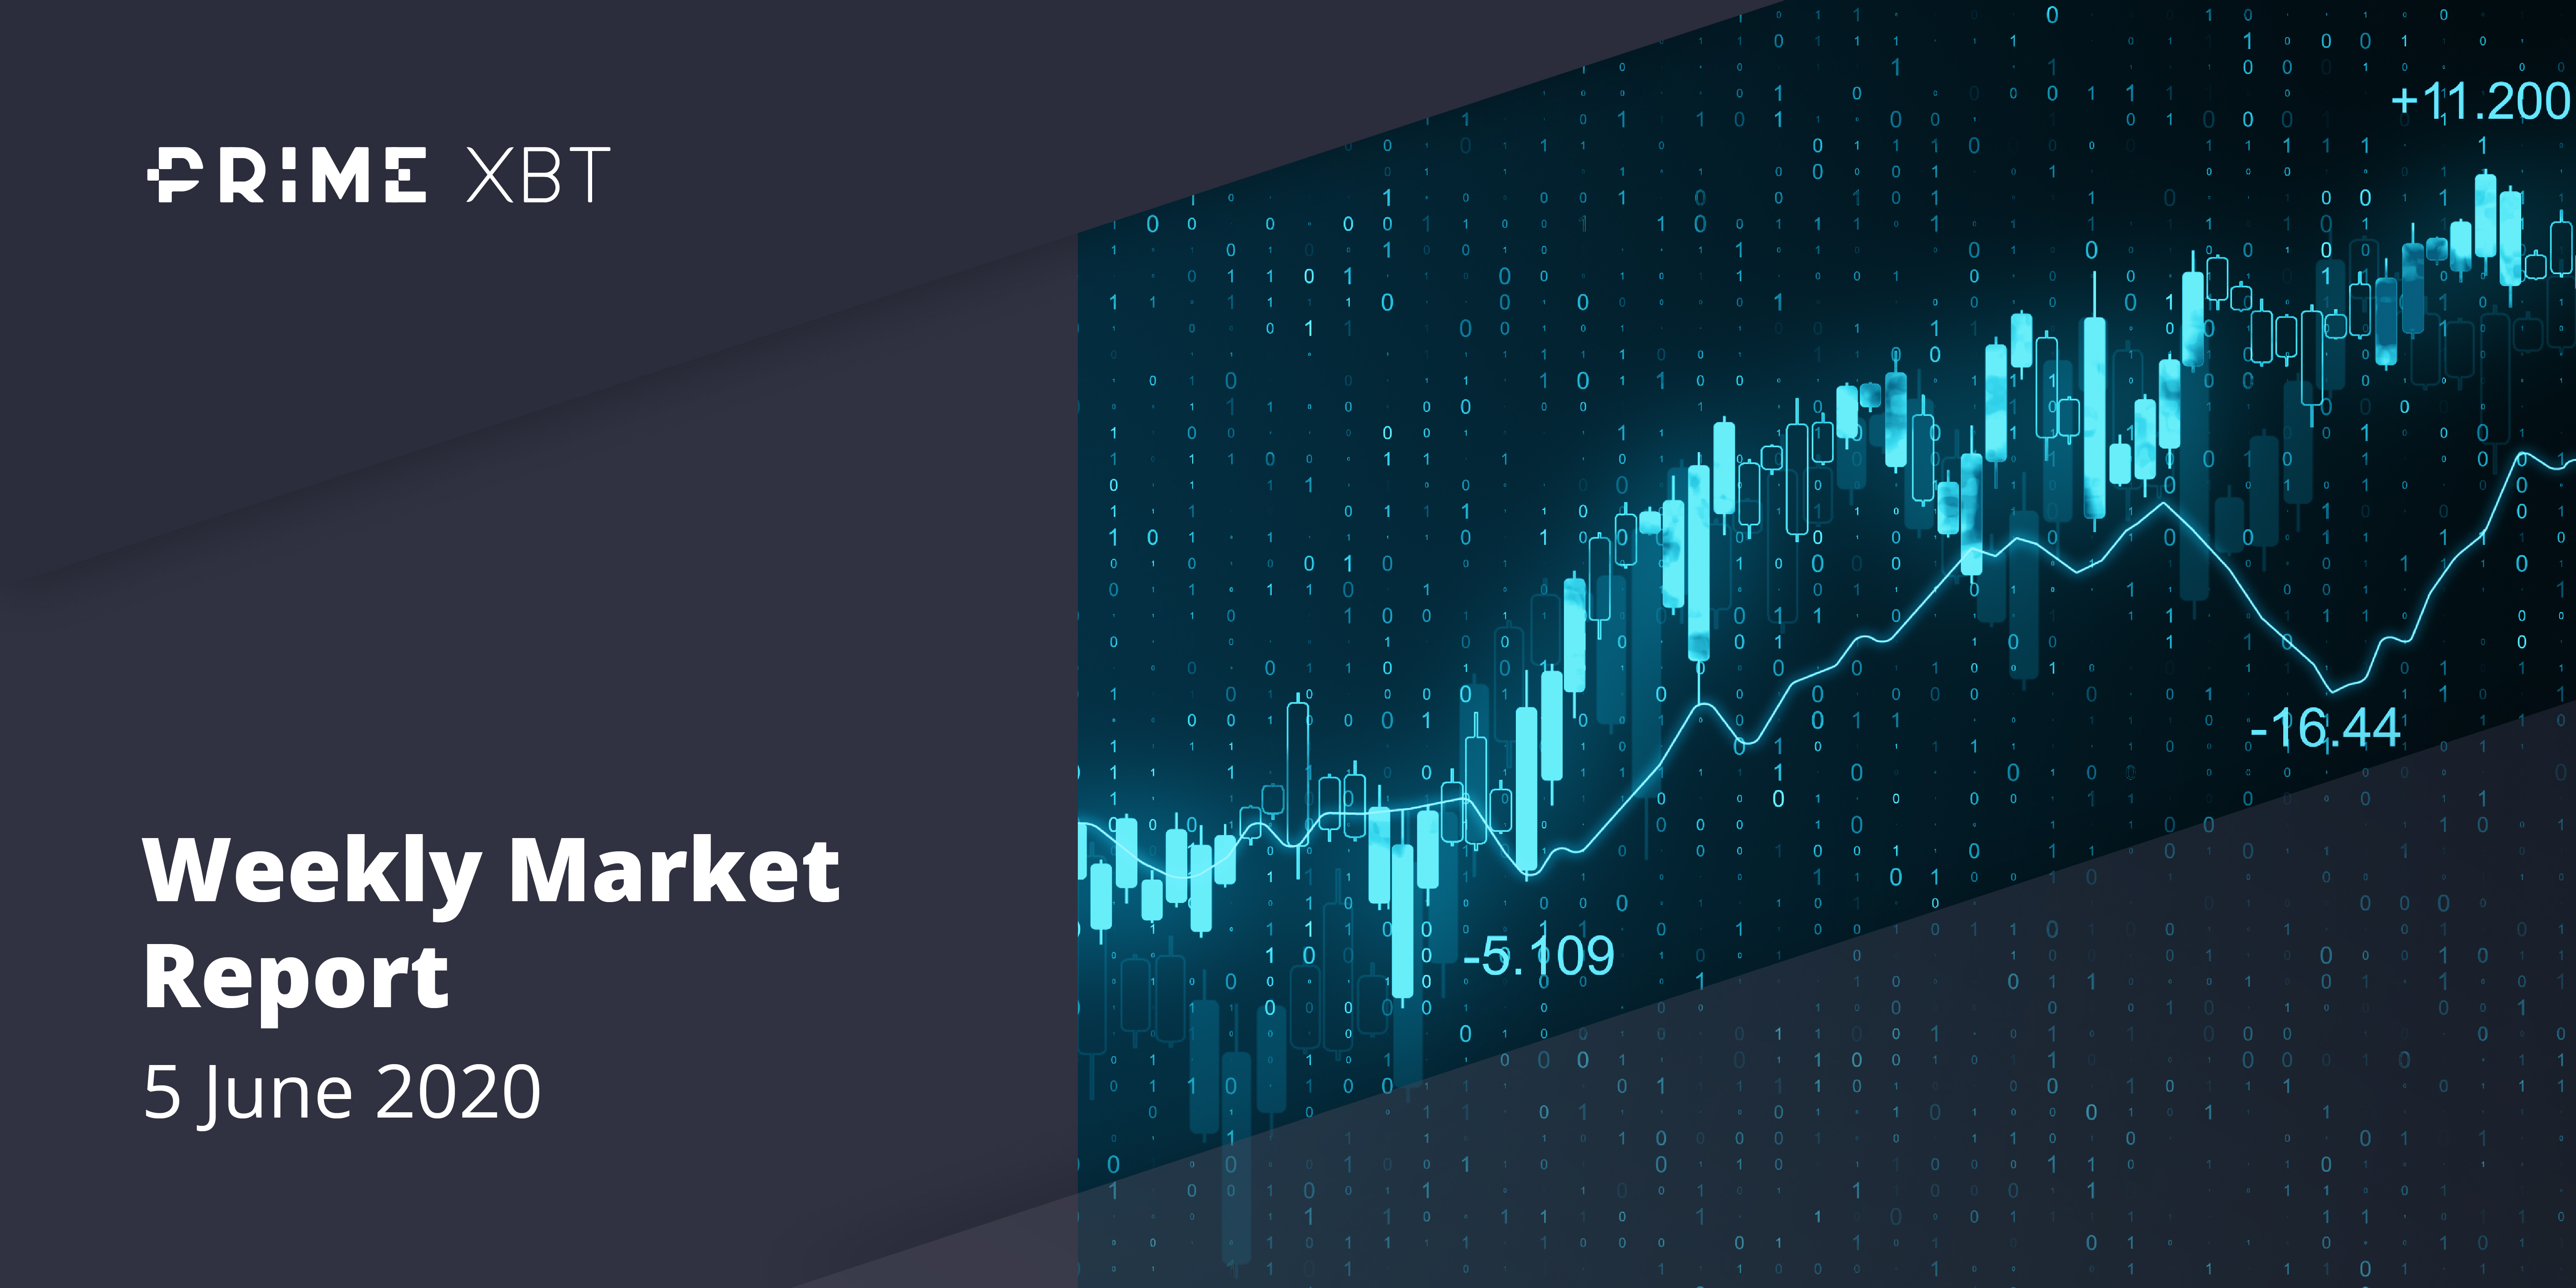 Crypto Market Report: Ethereum Stars While Bitcoin Posts Gains, High Leverage and Low Liquidity still and Issue as Greed Returns - 5.06.20